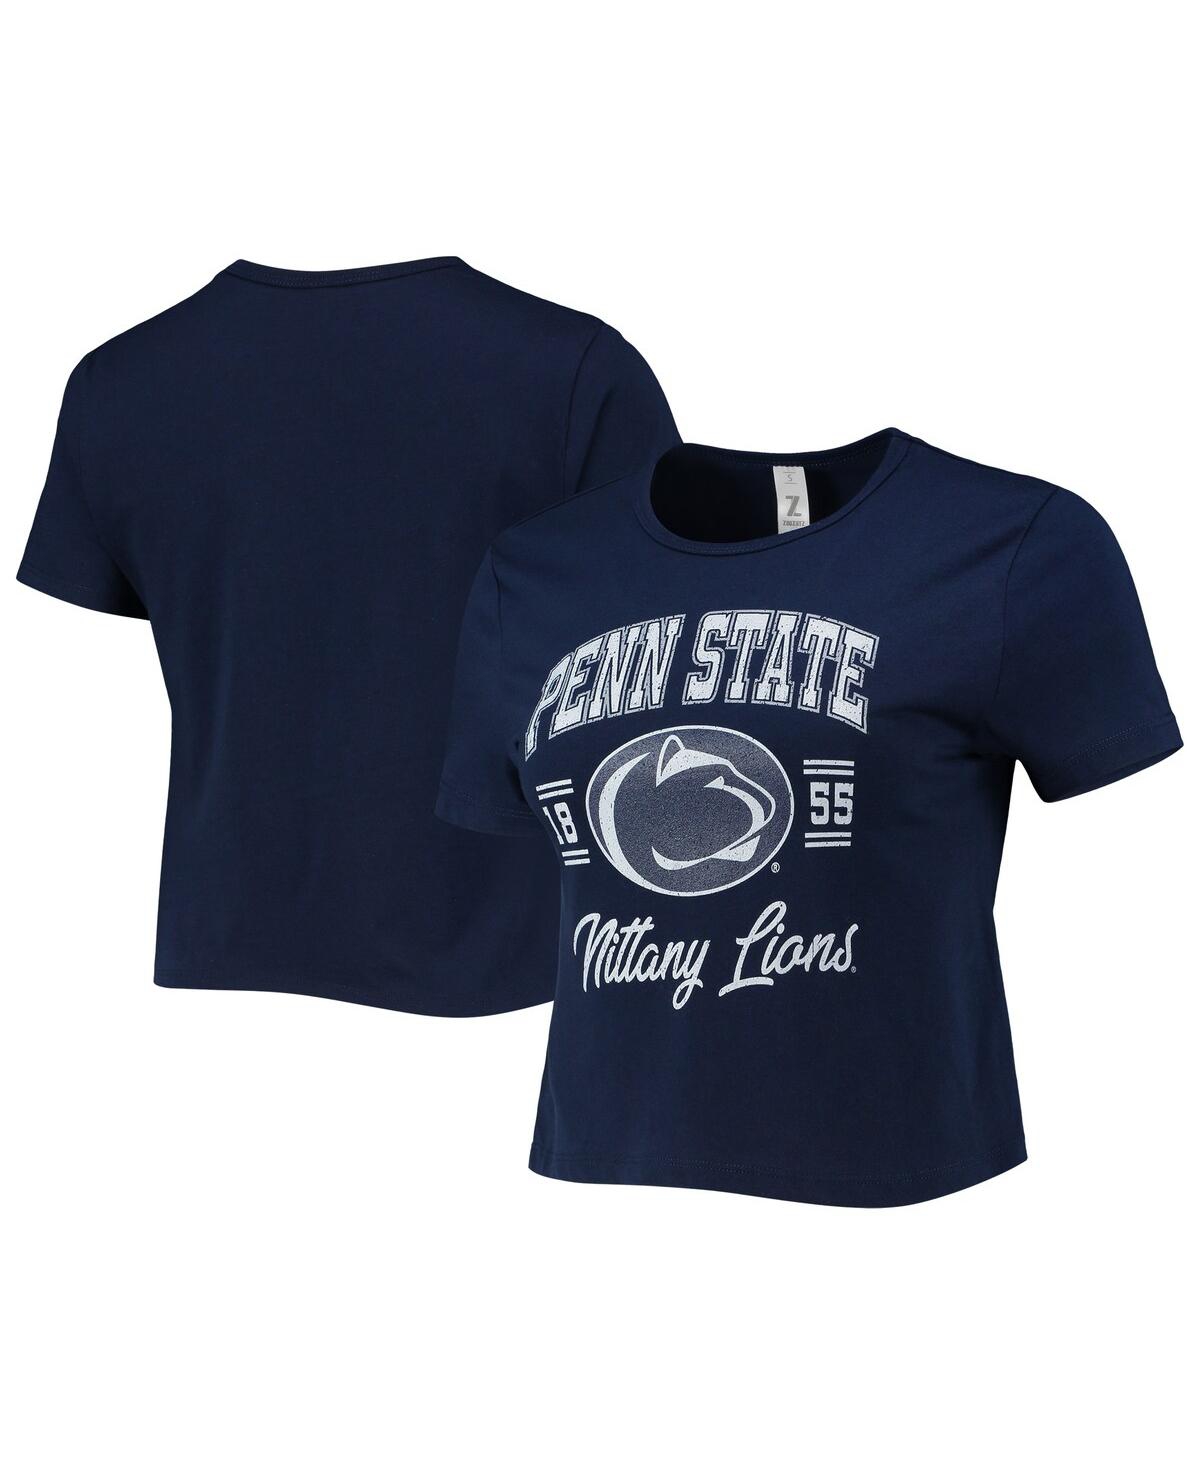 Shop Zoozatz Women's  Navy Distressed Penn State Nittany Lions Core Laurels Cropped T-shirt